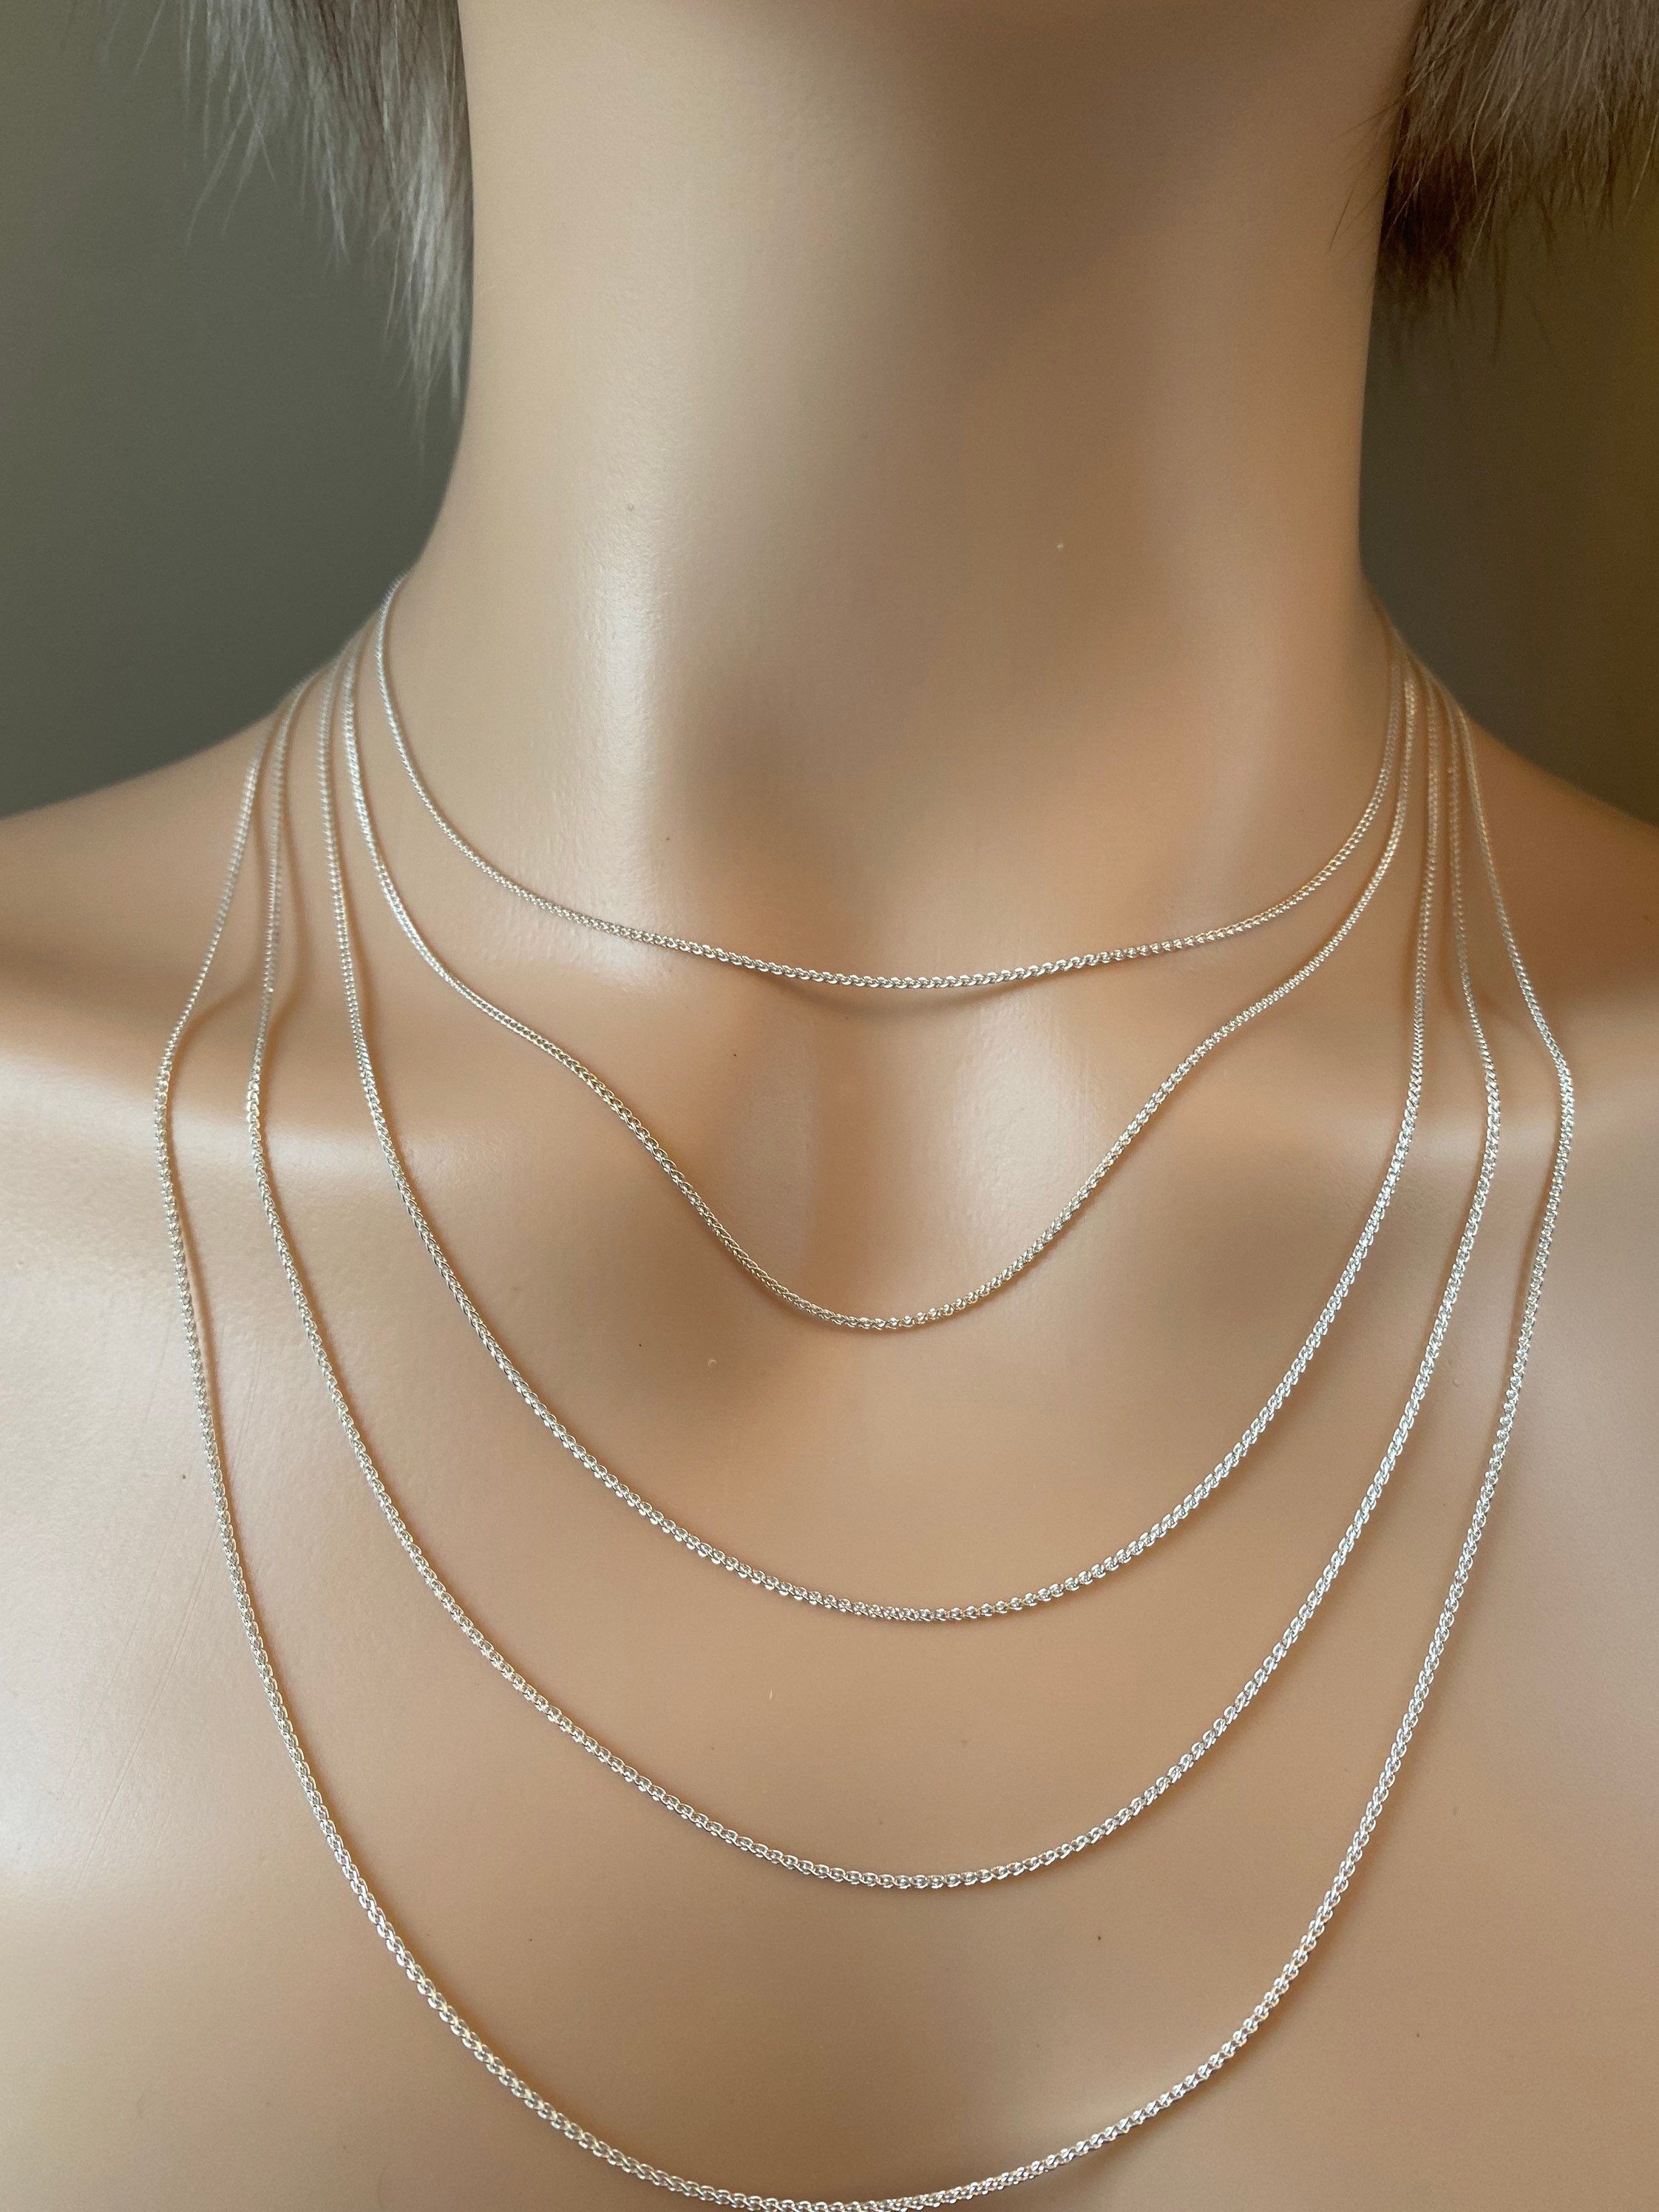 Silver Rose Gold Plated 1mm Wide Spiga Chain - 16in - X60028